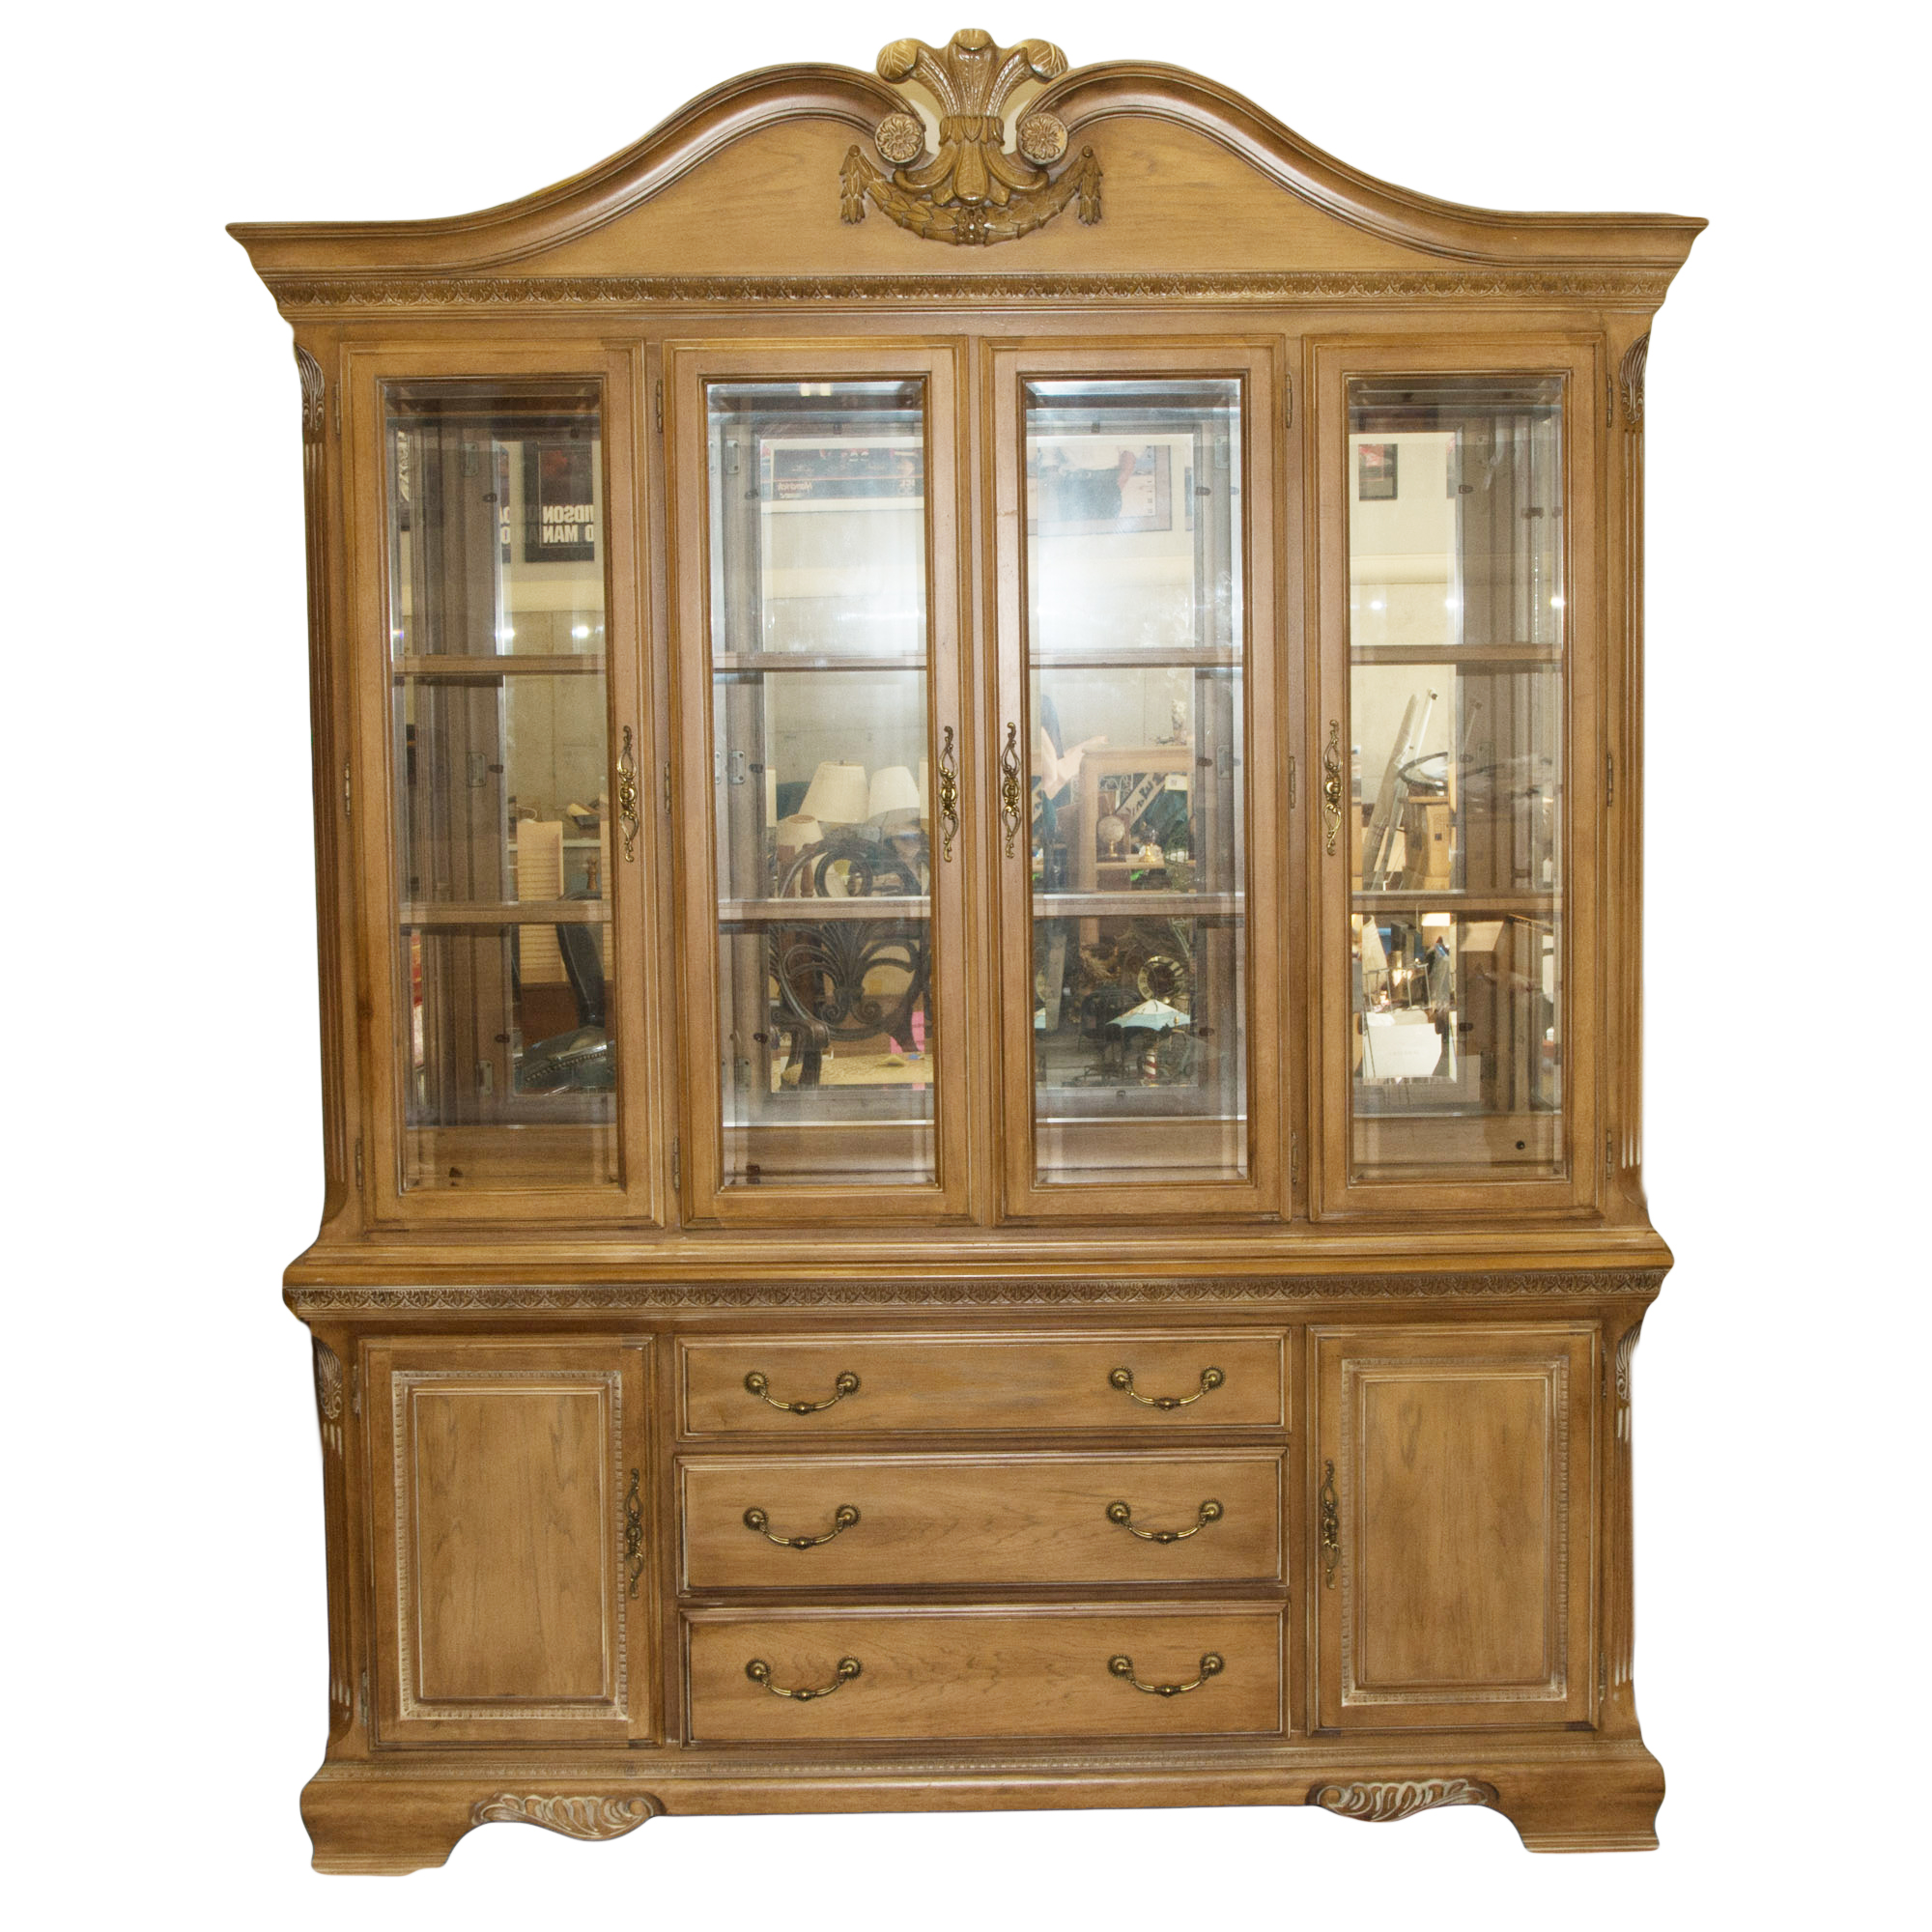 Lexington China Cabinet Home Design Ideas And Pictures